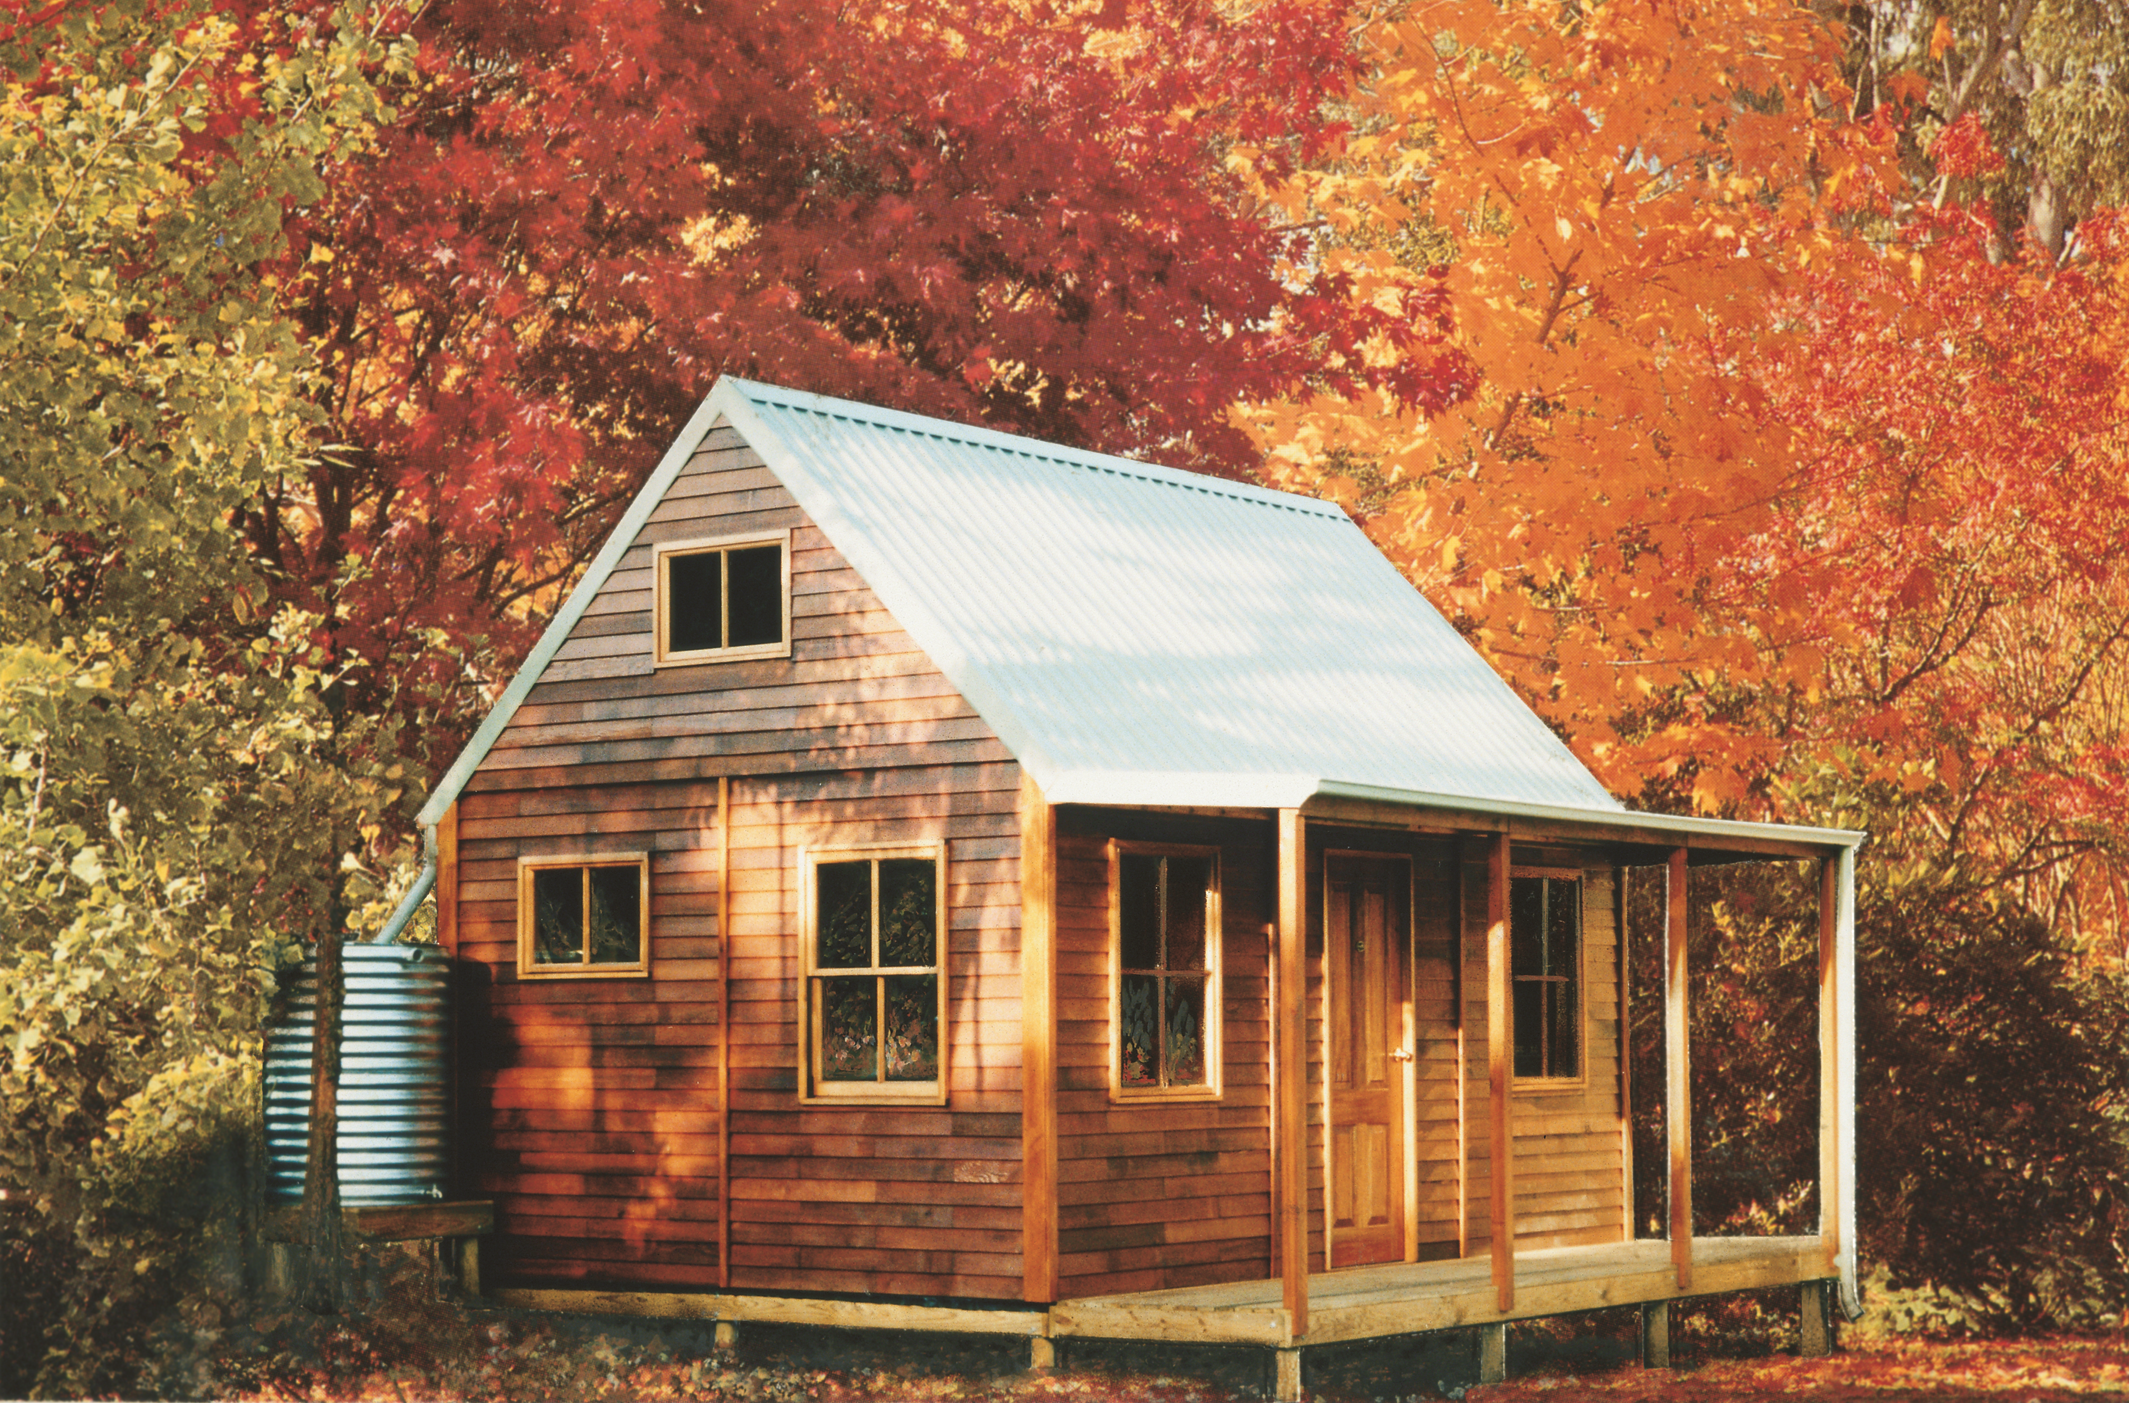 Cabin with autumn trees behind